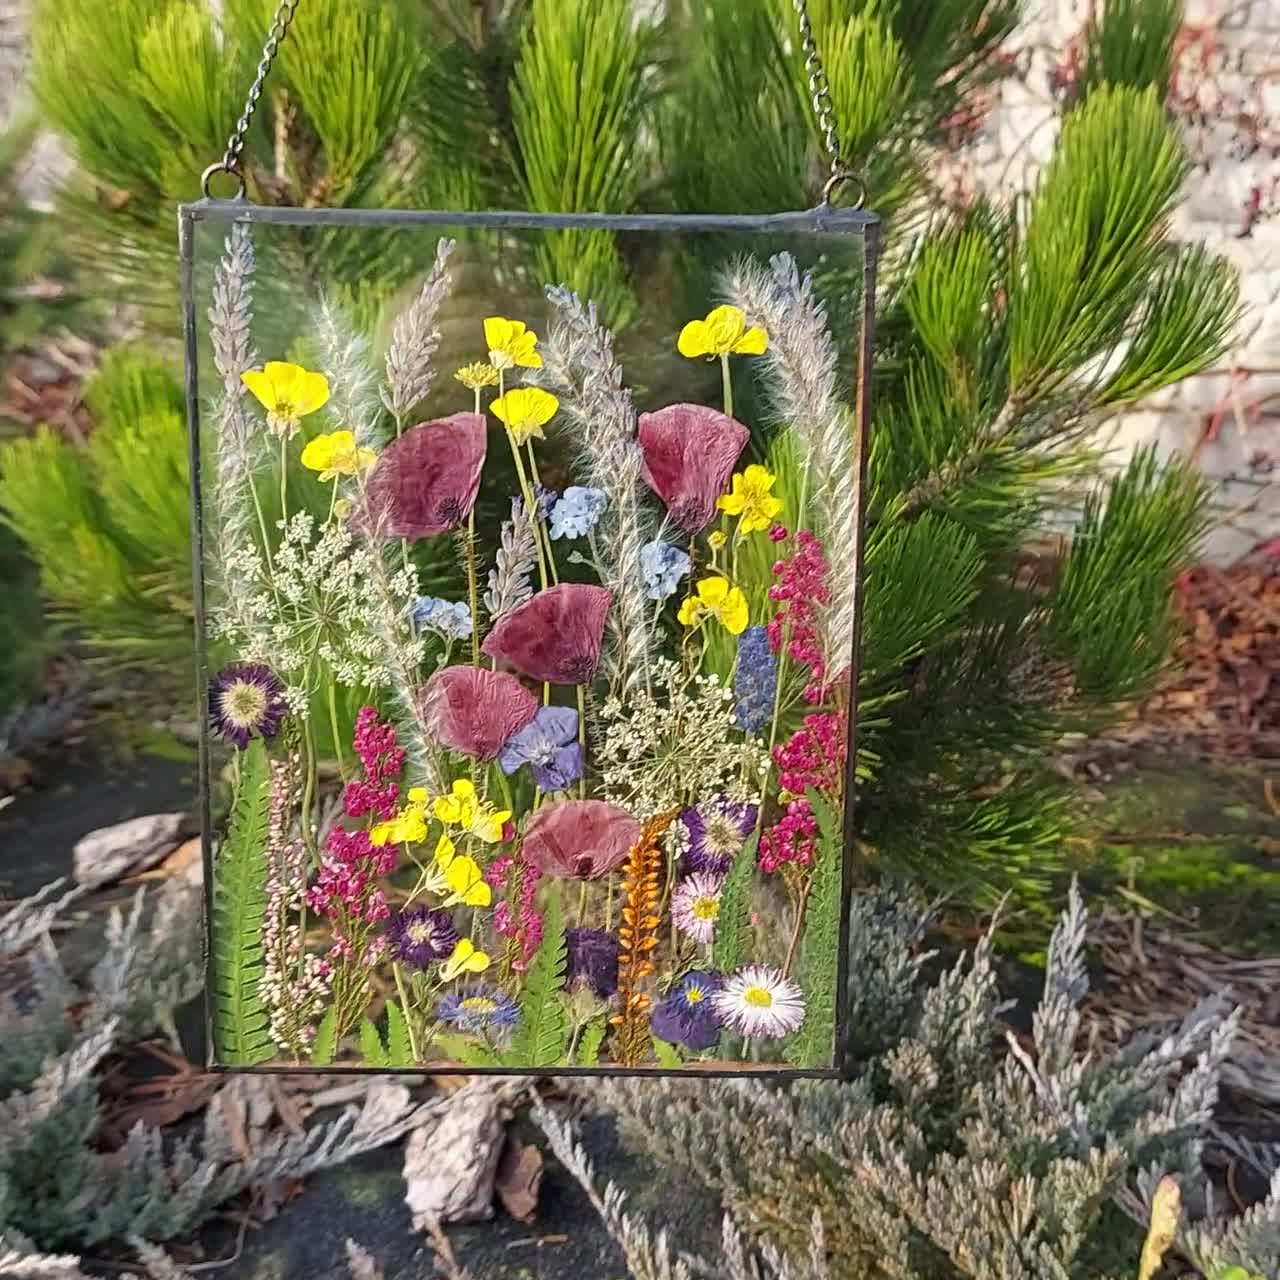 33.stained Glass. Meadow. Decor. Flower Frame. Dried Flowers. Pressed  Flower Frame. Pressed Flowers. Birthday. Present. Anniversary. 